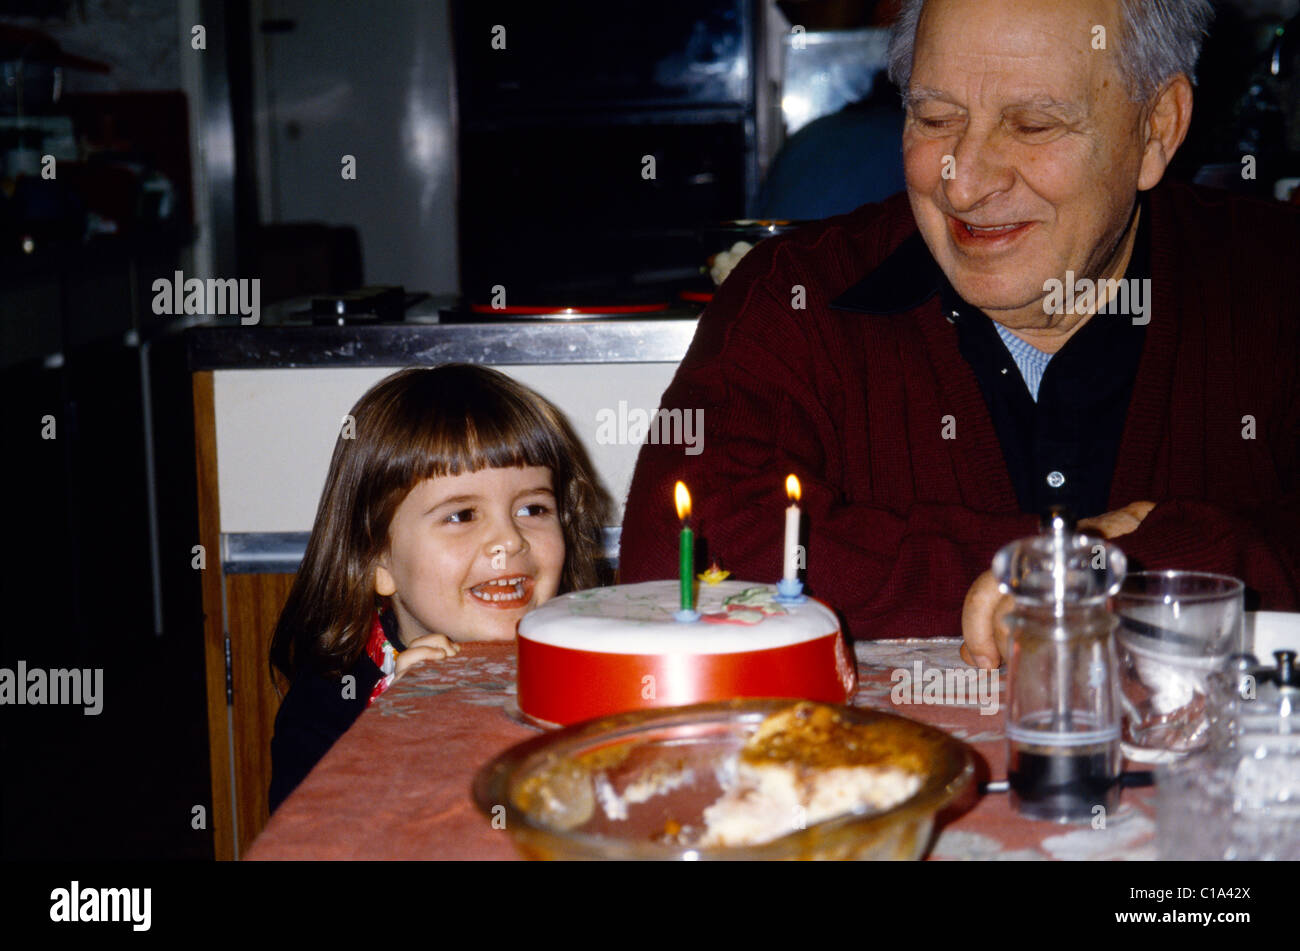 Childs Birthday Party Child Looking At Cake Next To Grandfather Stock Photo